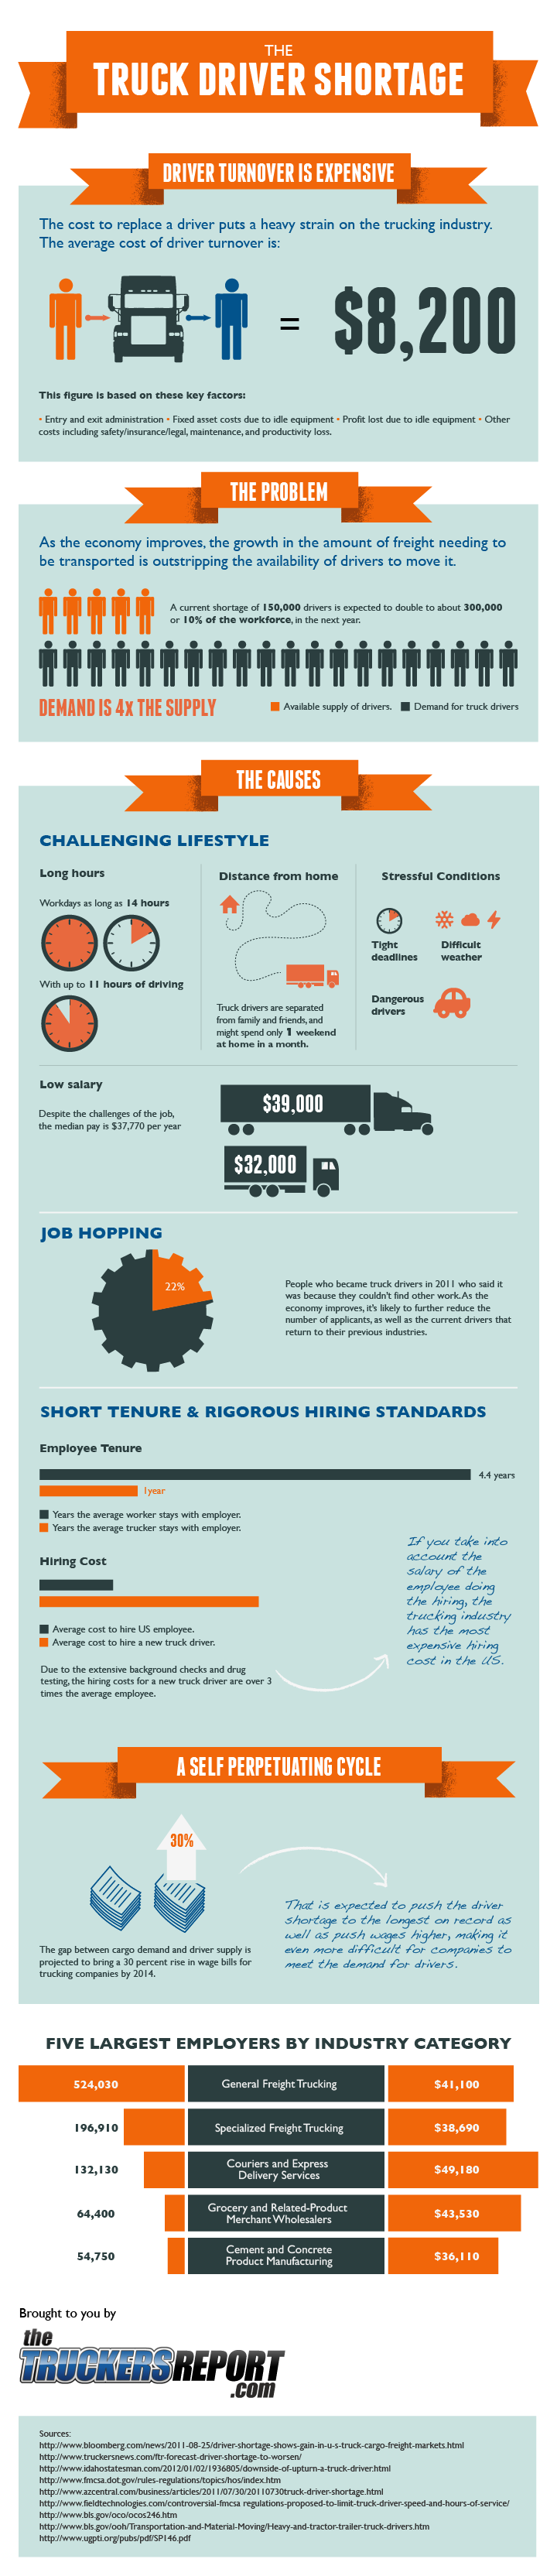 Truck Driver Shortage and Turnover Infographic